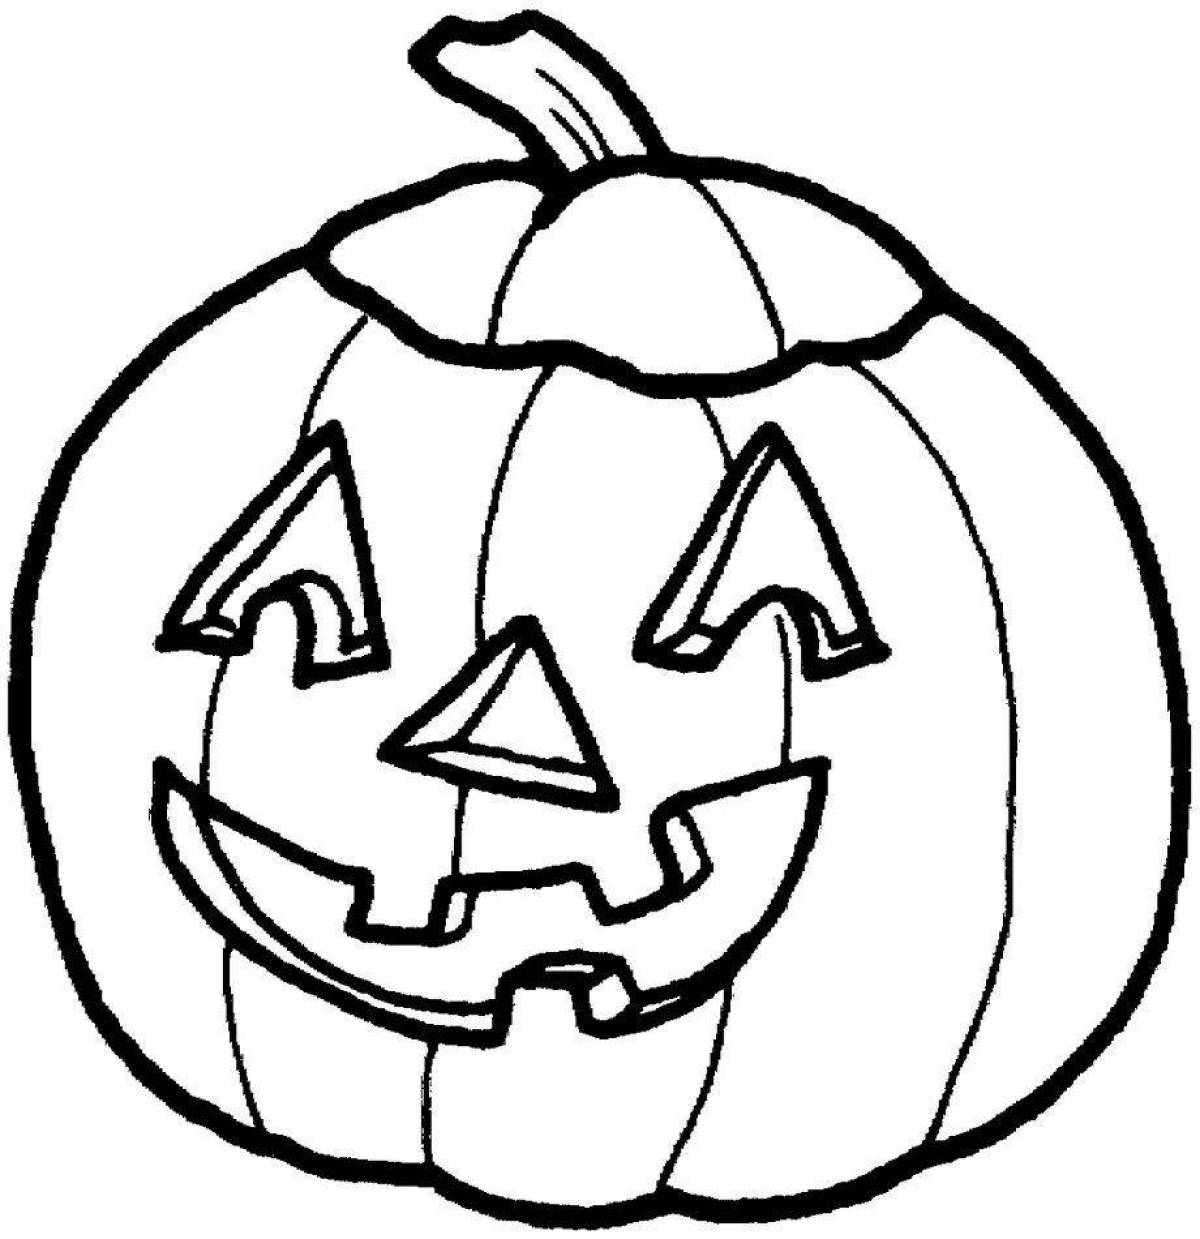 Scary halloween pumpkin coloring page